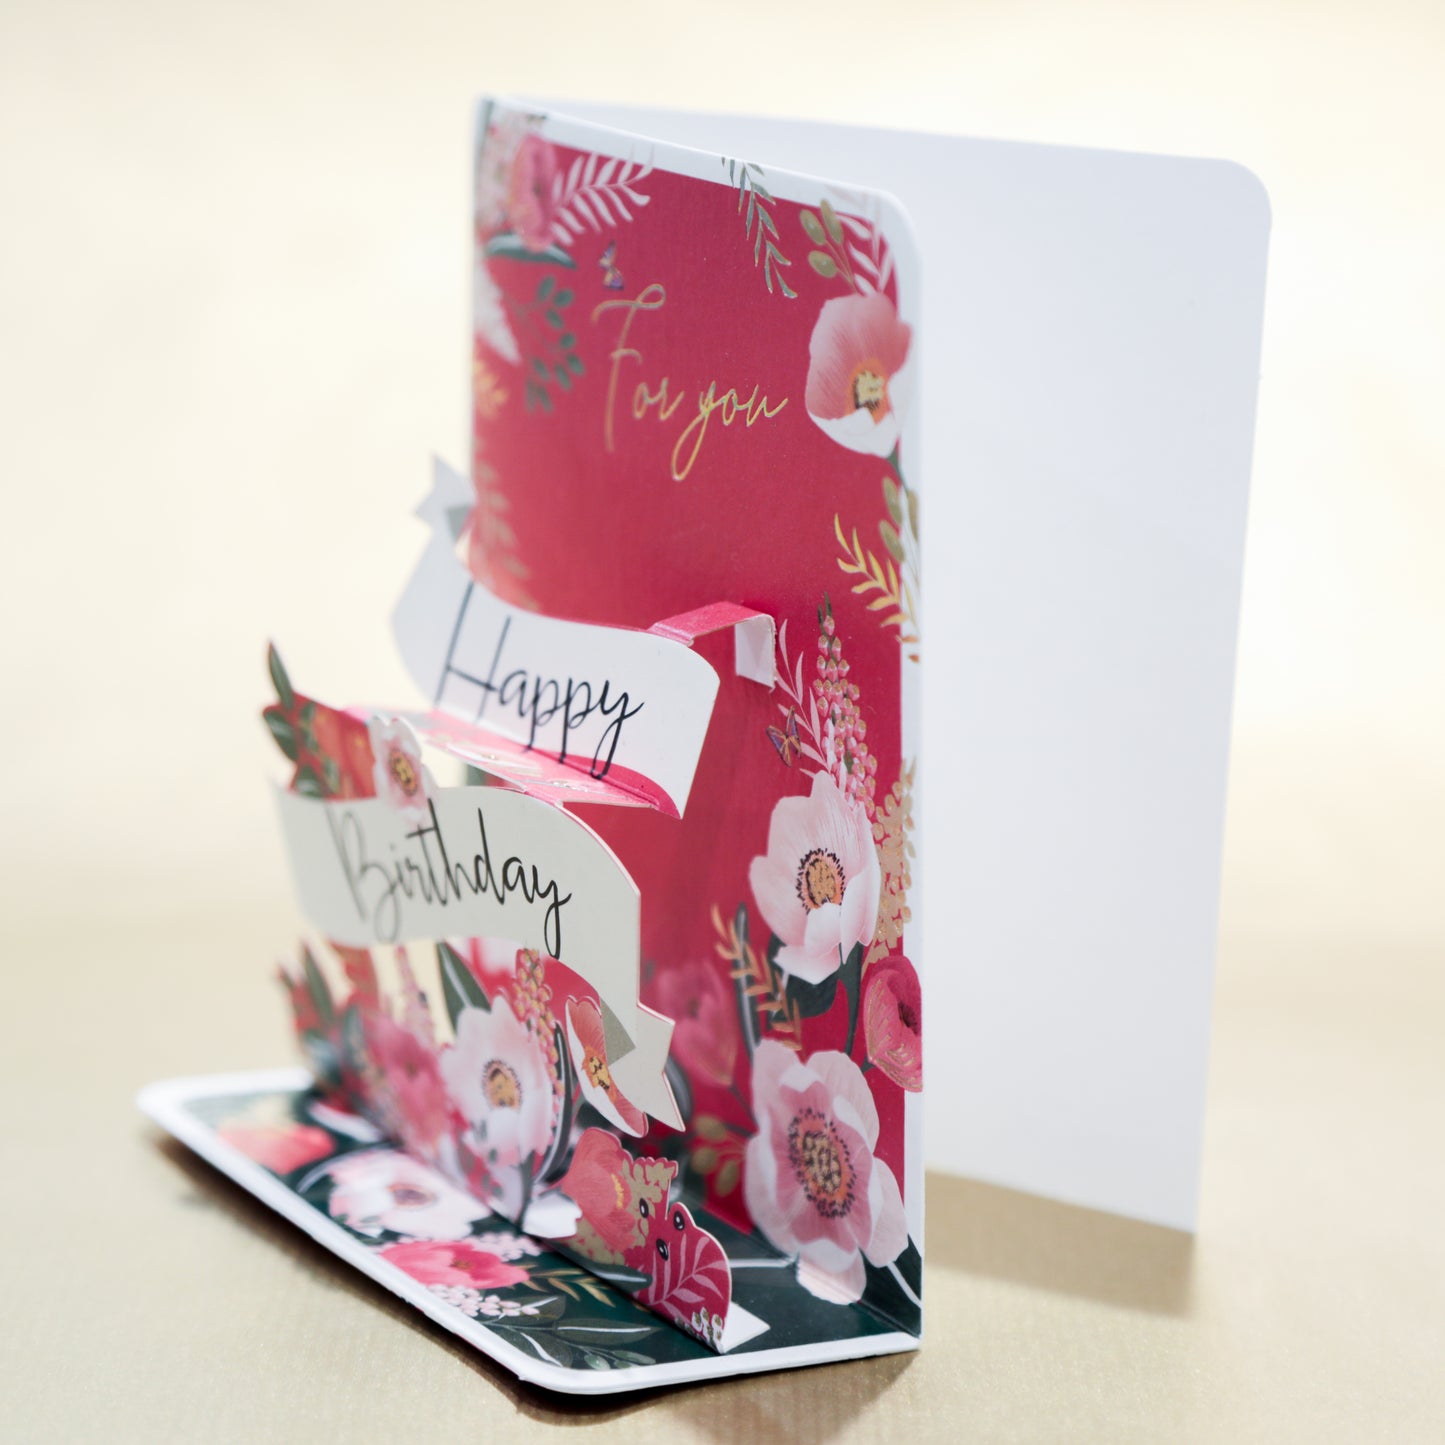 3D Greeting Card – Happy Birthday, Pink and Gold Flowers